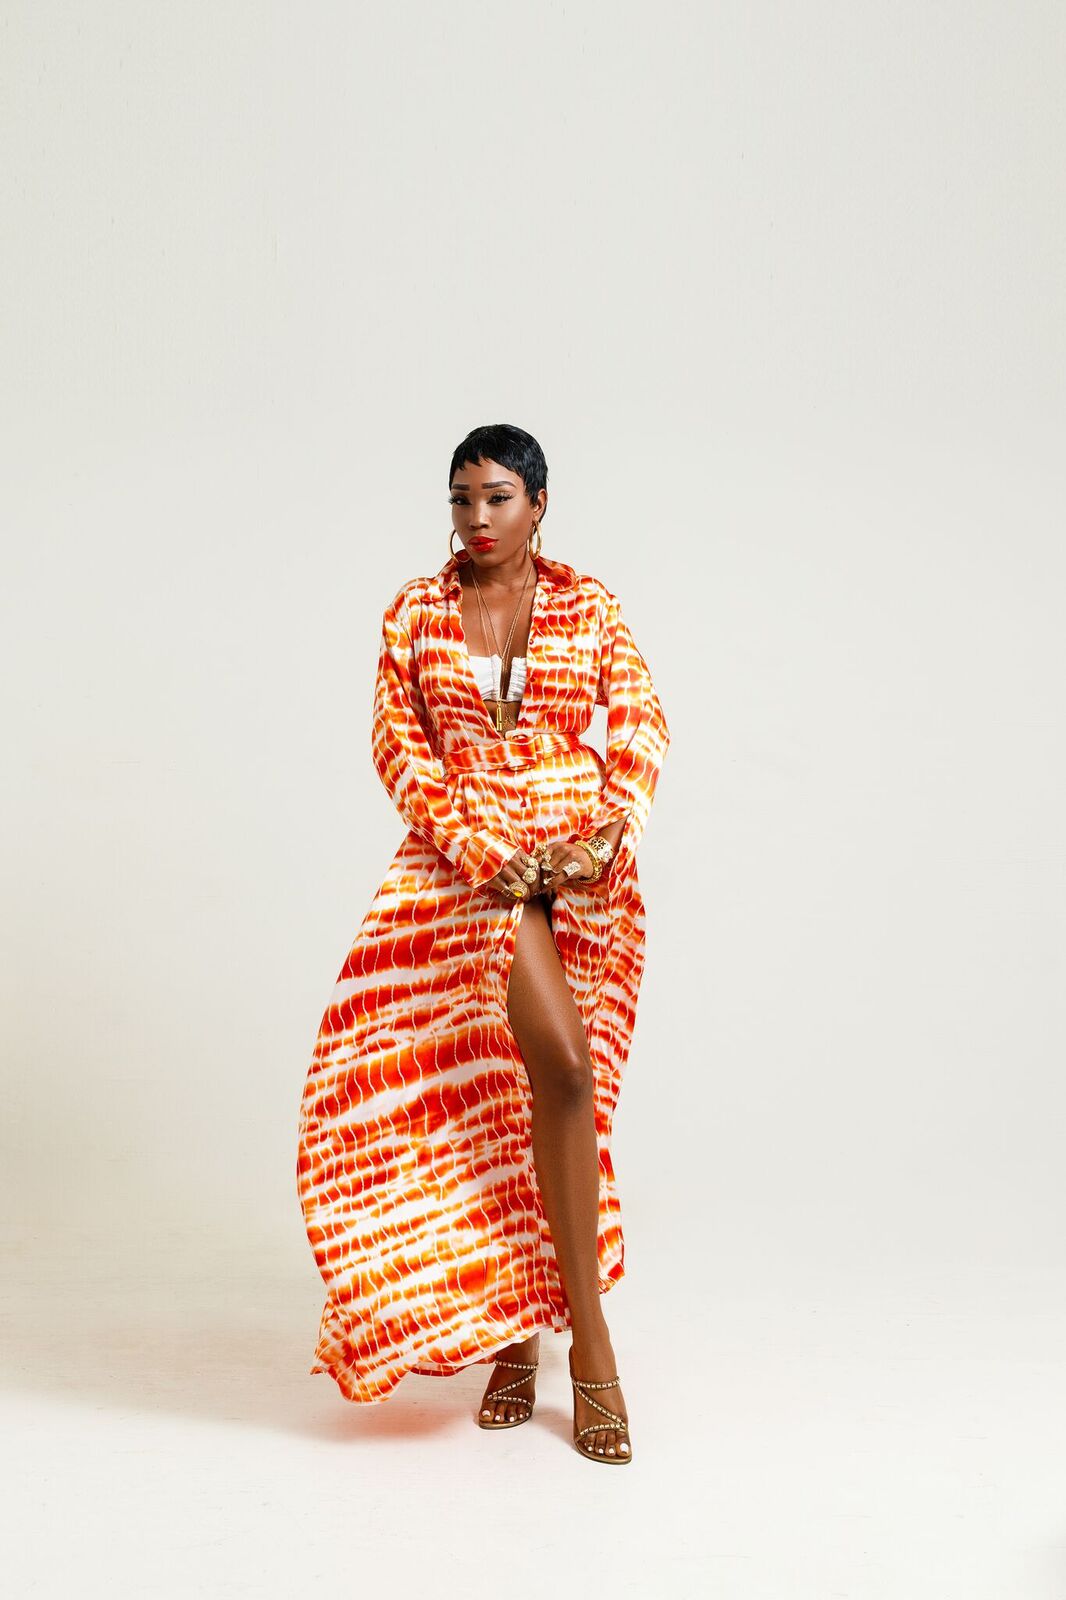 Sai Sankoh Just Launched Her Womenswear Label and It’s As Fabulous As You’d Expect!